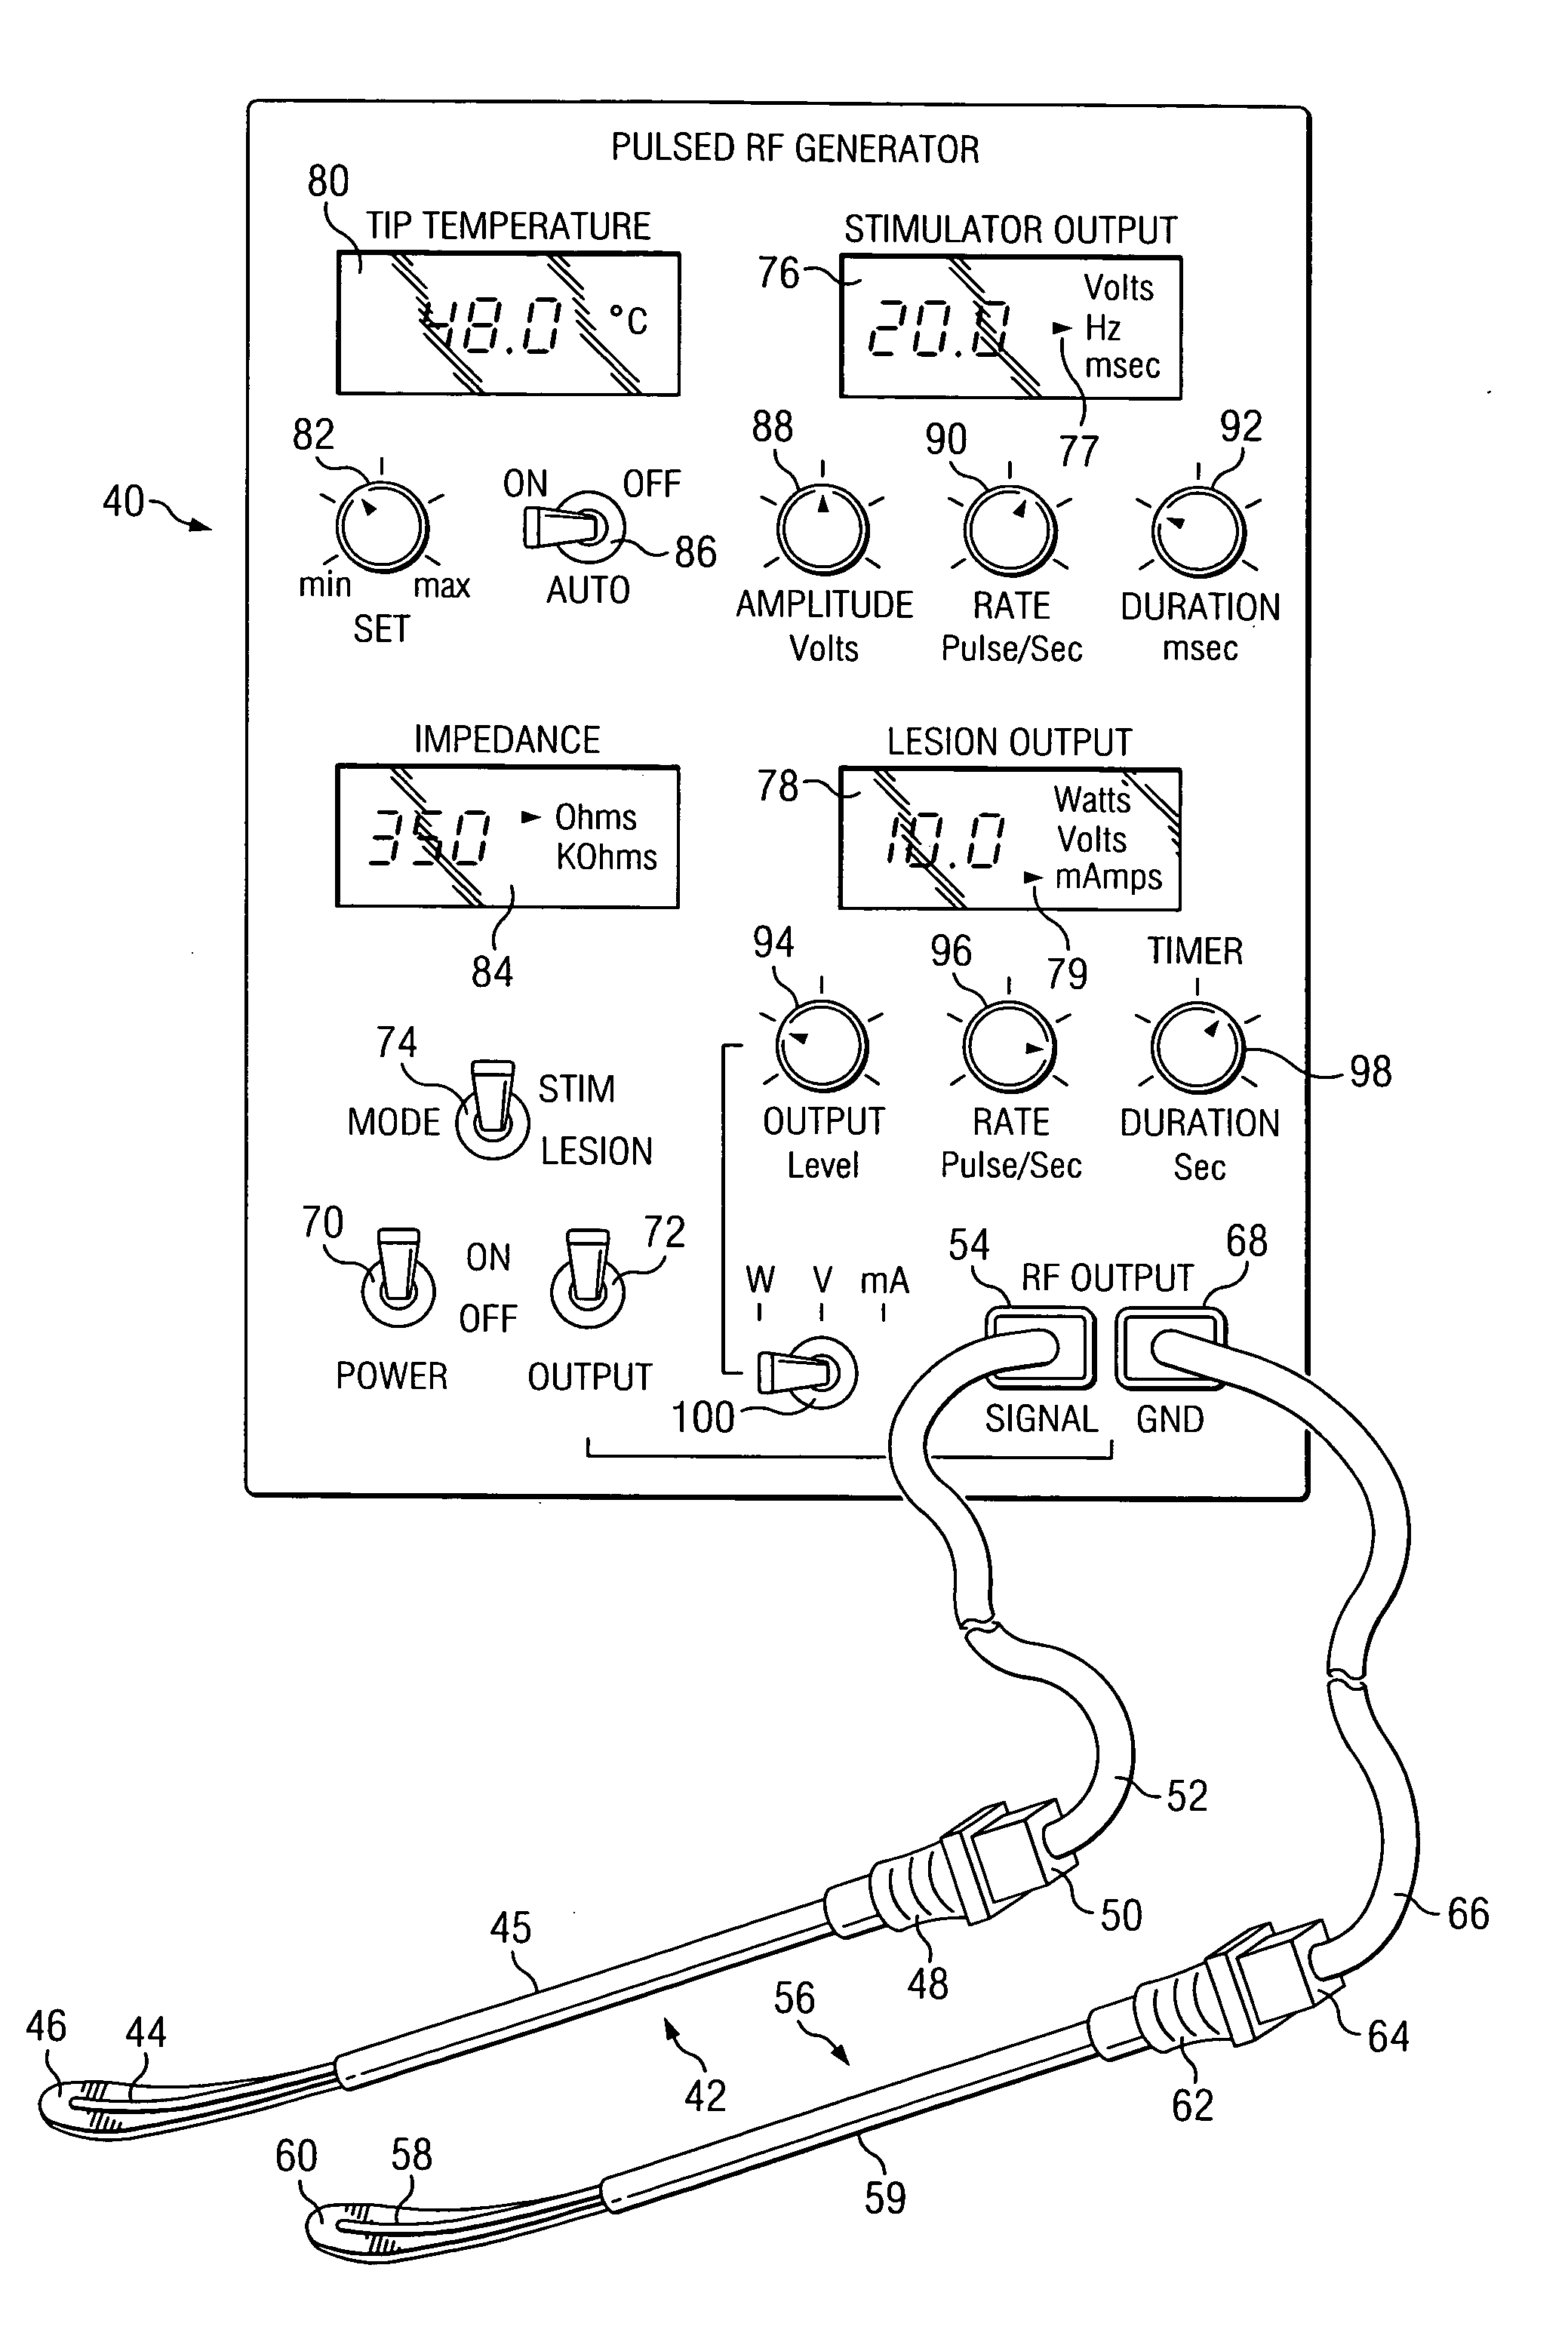 Method and apparatus for veterinary RF pain management